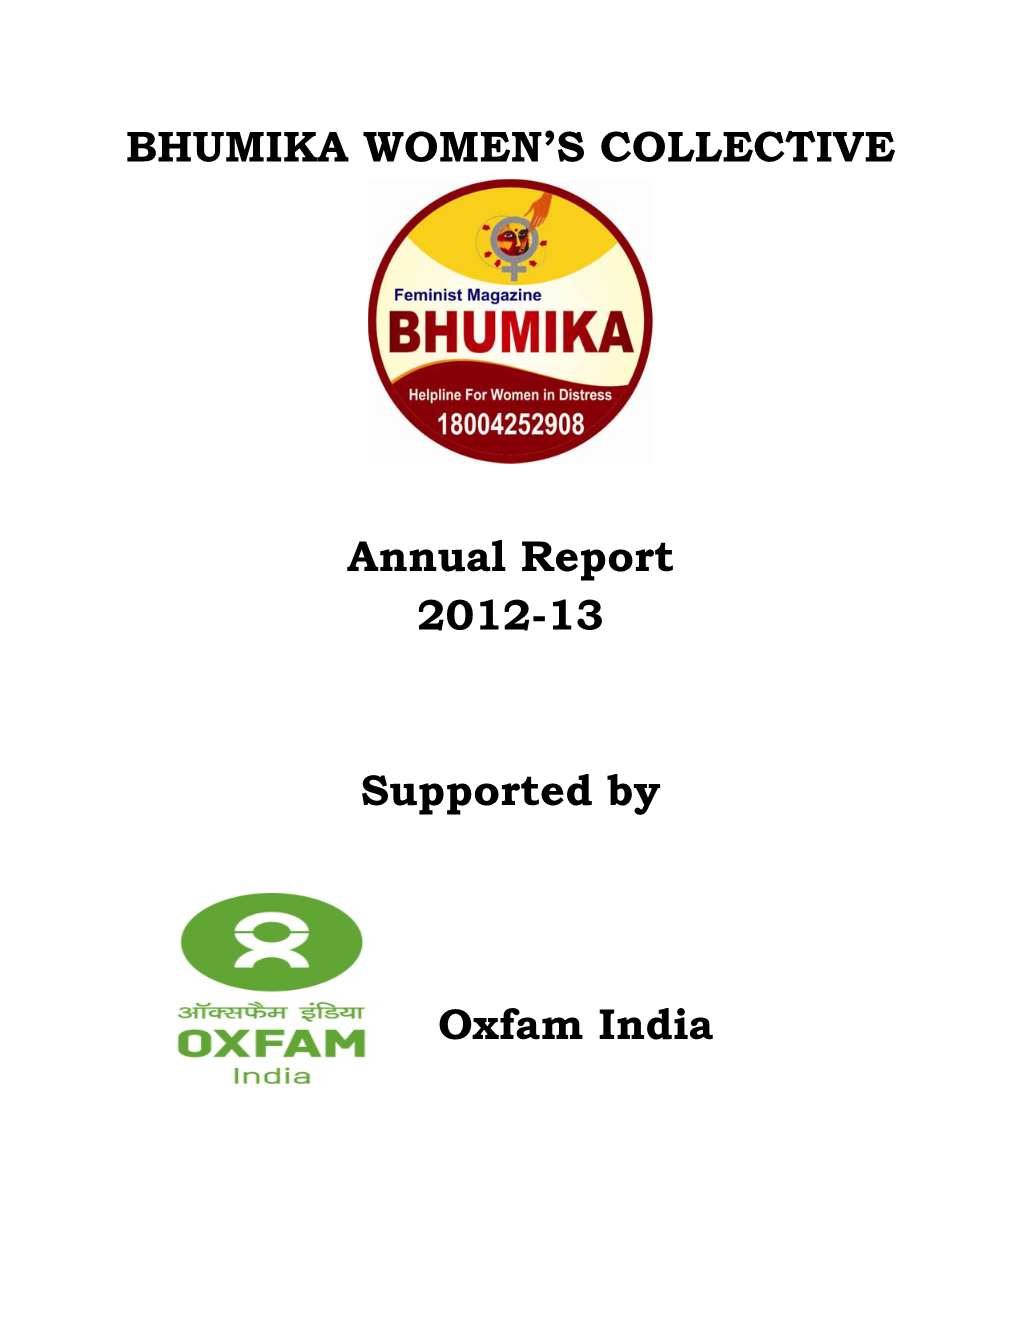 BHUMIKA WOMEN's COLLECTIVE Annual Report 2012-13 Supported